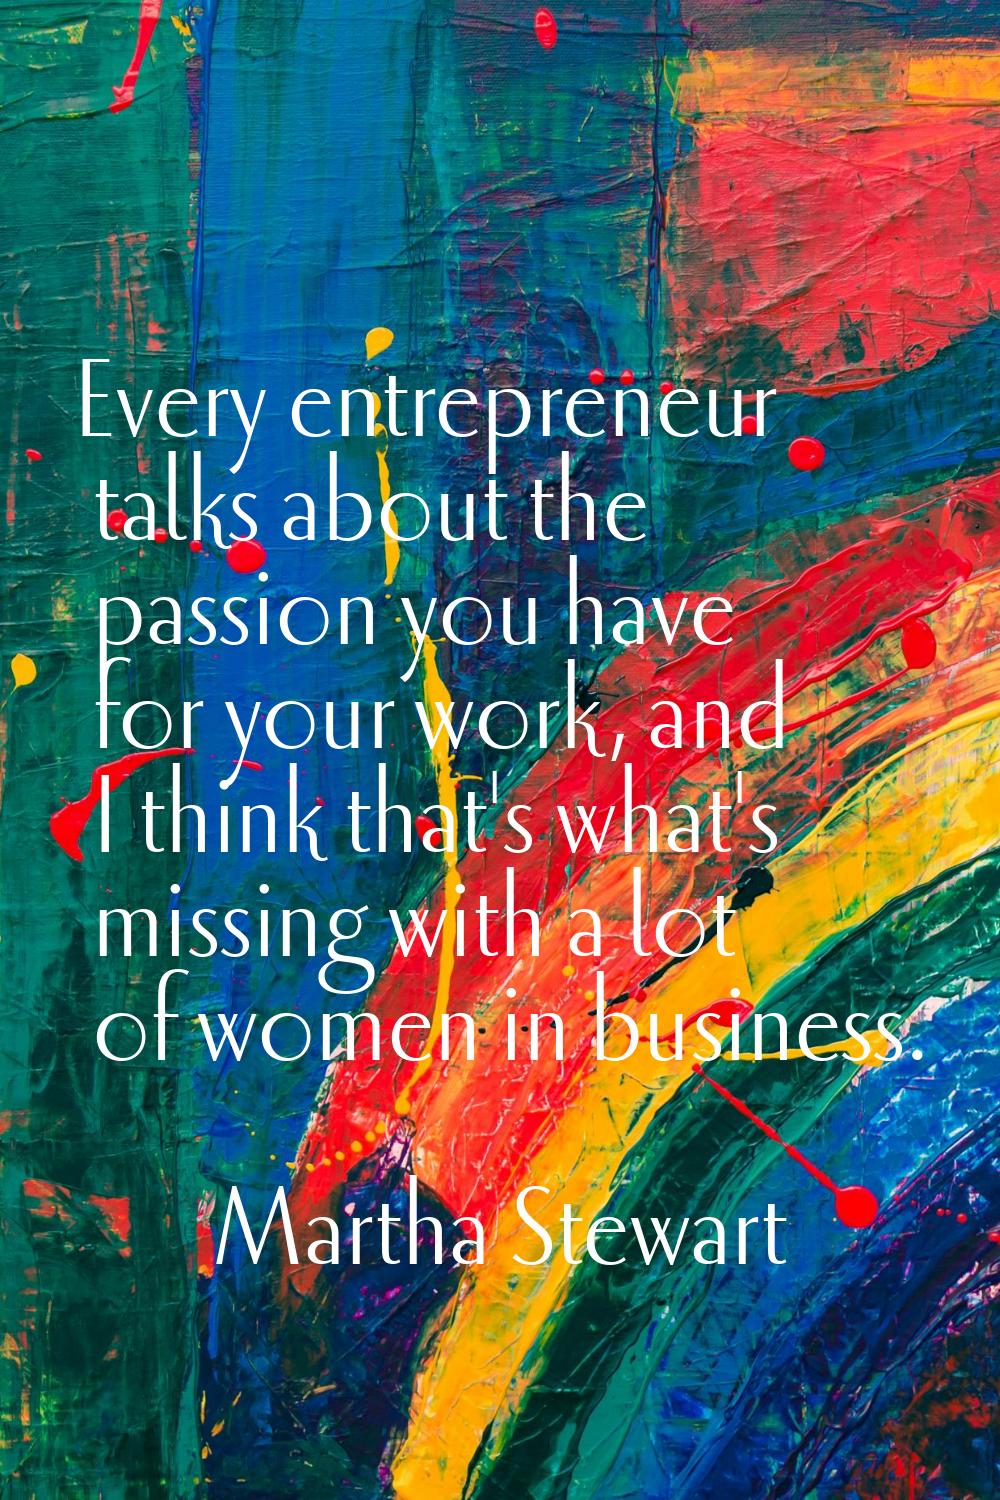 Every entrepreneur talks about the passion you have for your work, and I think that's what's missin